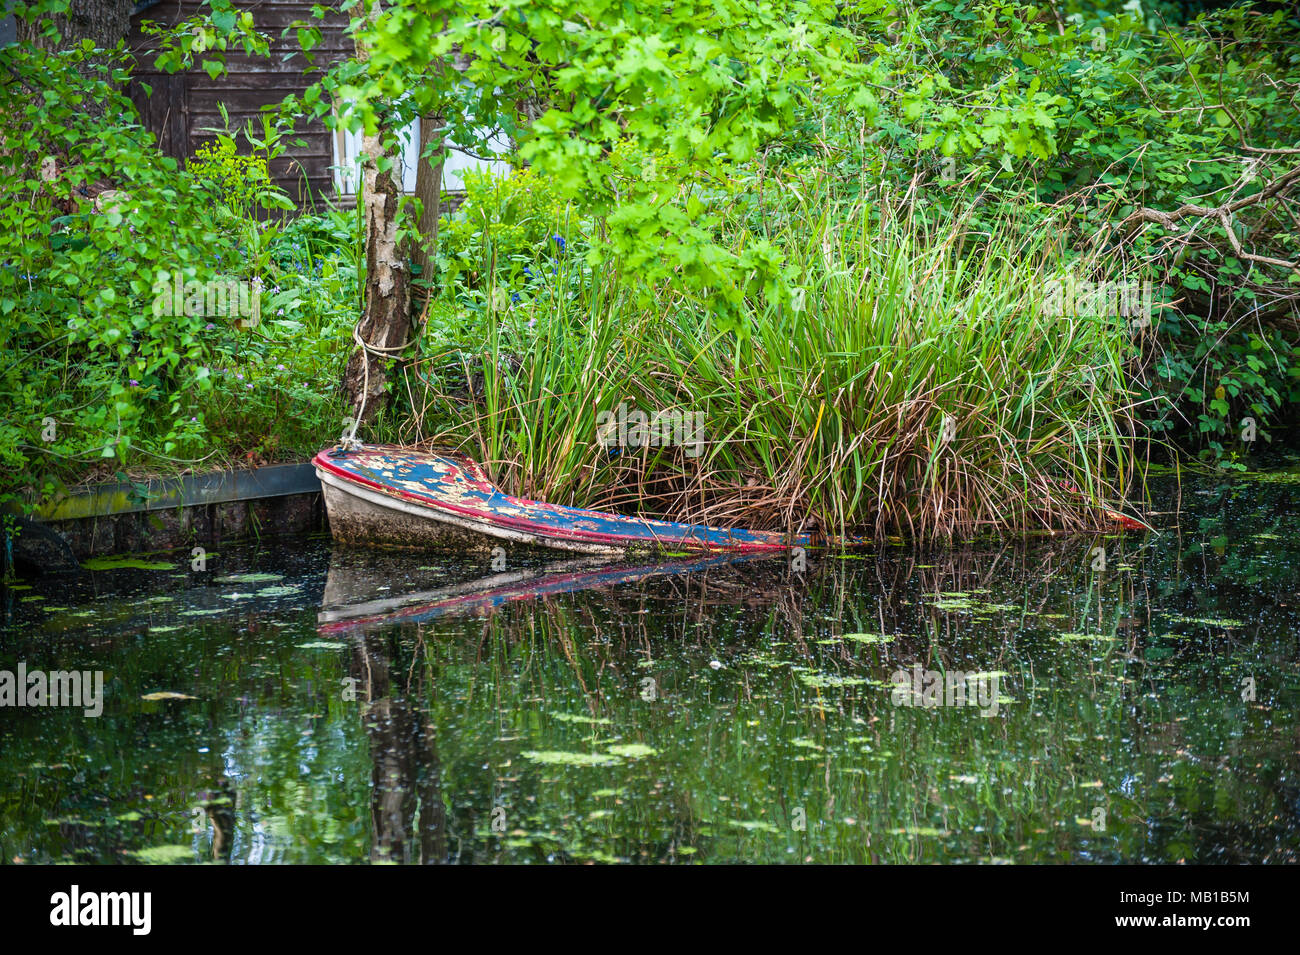 A derelict rowing boat being over grown by water reeds slowing sinking into a canal Stock Photo